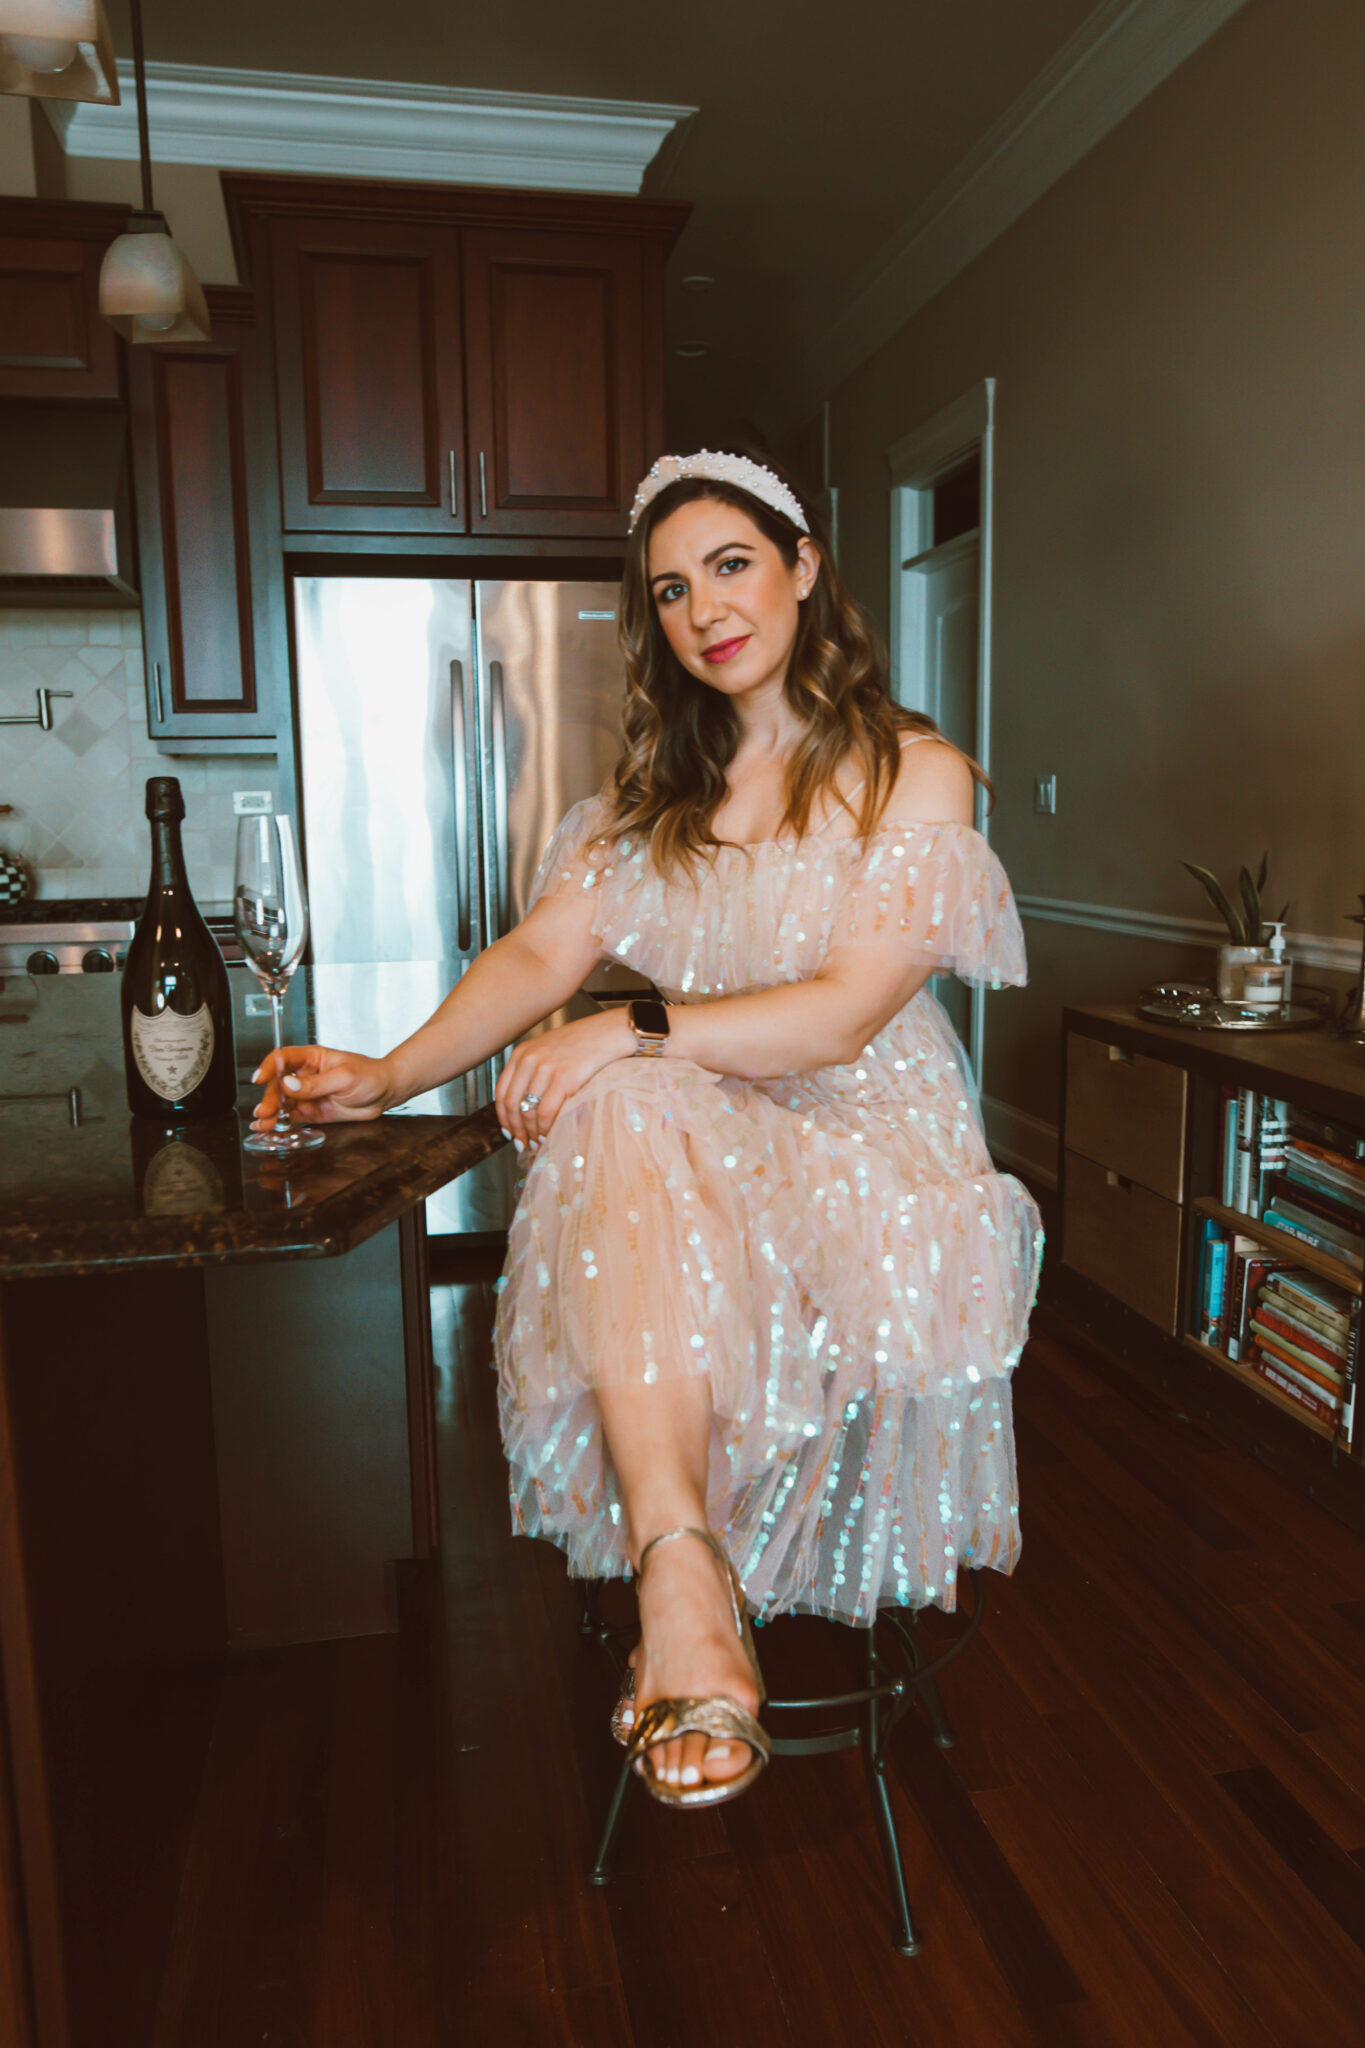 Party Dress by popular Chicago fashion blog, Glass of Glam: image of a woman holding a champagne flute and wearing a sequin party dress, pearl embellished knot headband, and Gucci block heel sandals. 